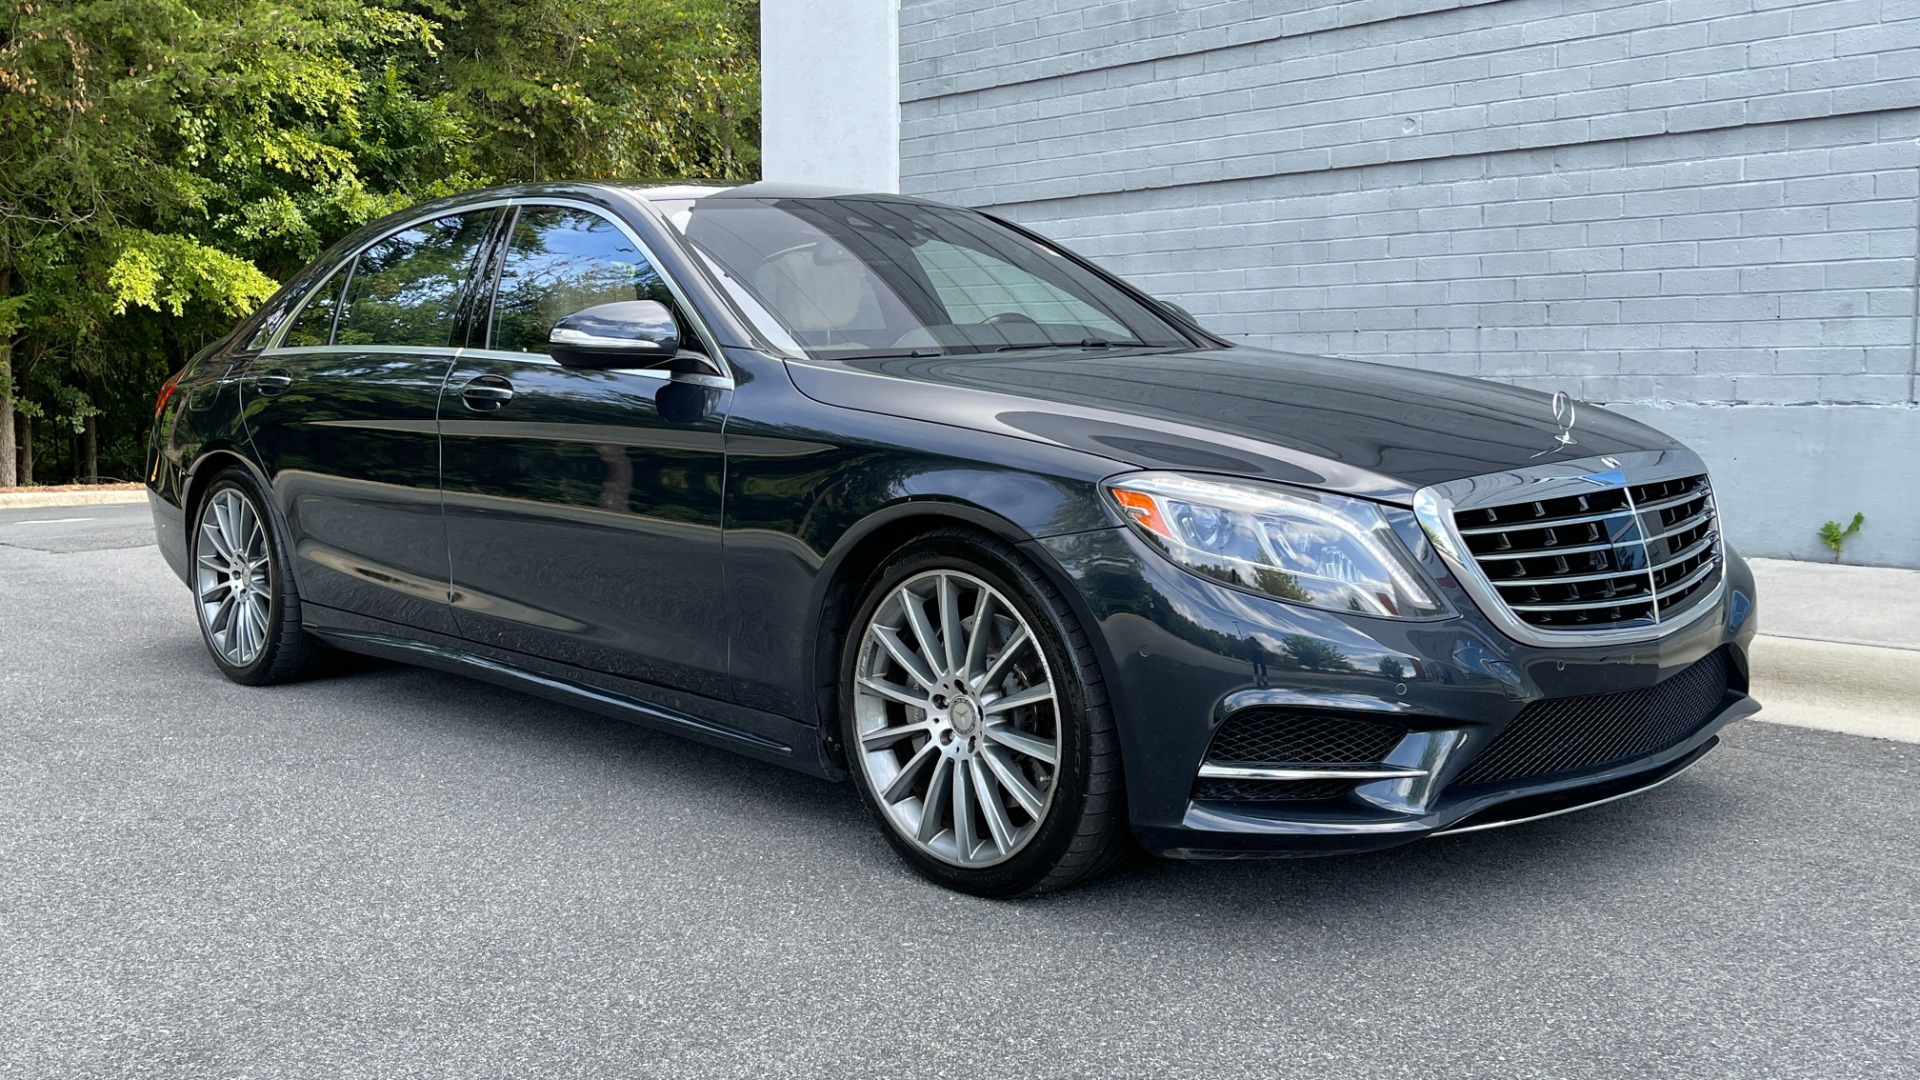 Used 2015 Mercedes-Benz S-Class S550 / REAR SEATING PACKAGE / PREMIUM / DRIVER ASSISTANCE for sale Sold at Formula Imports in Charlotte NC 28227 3